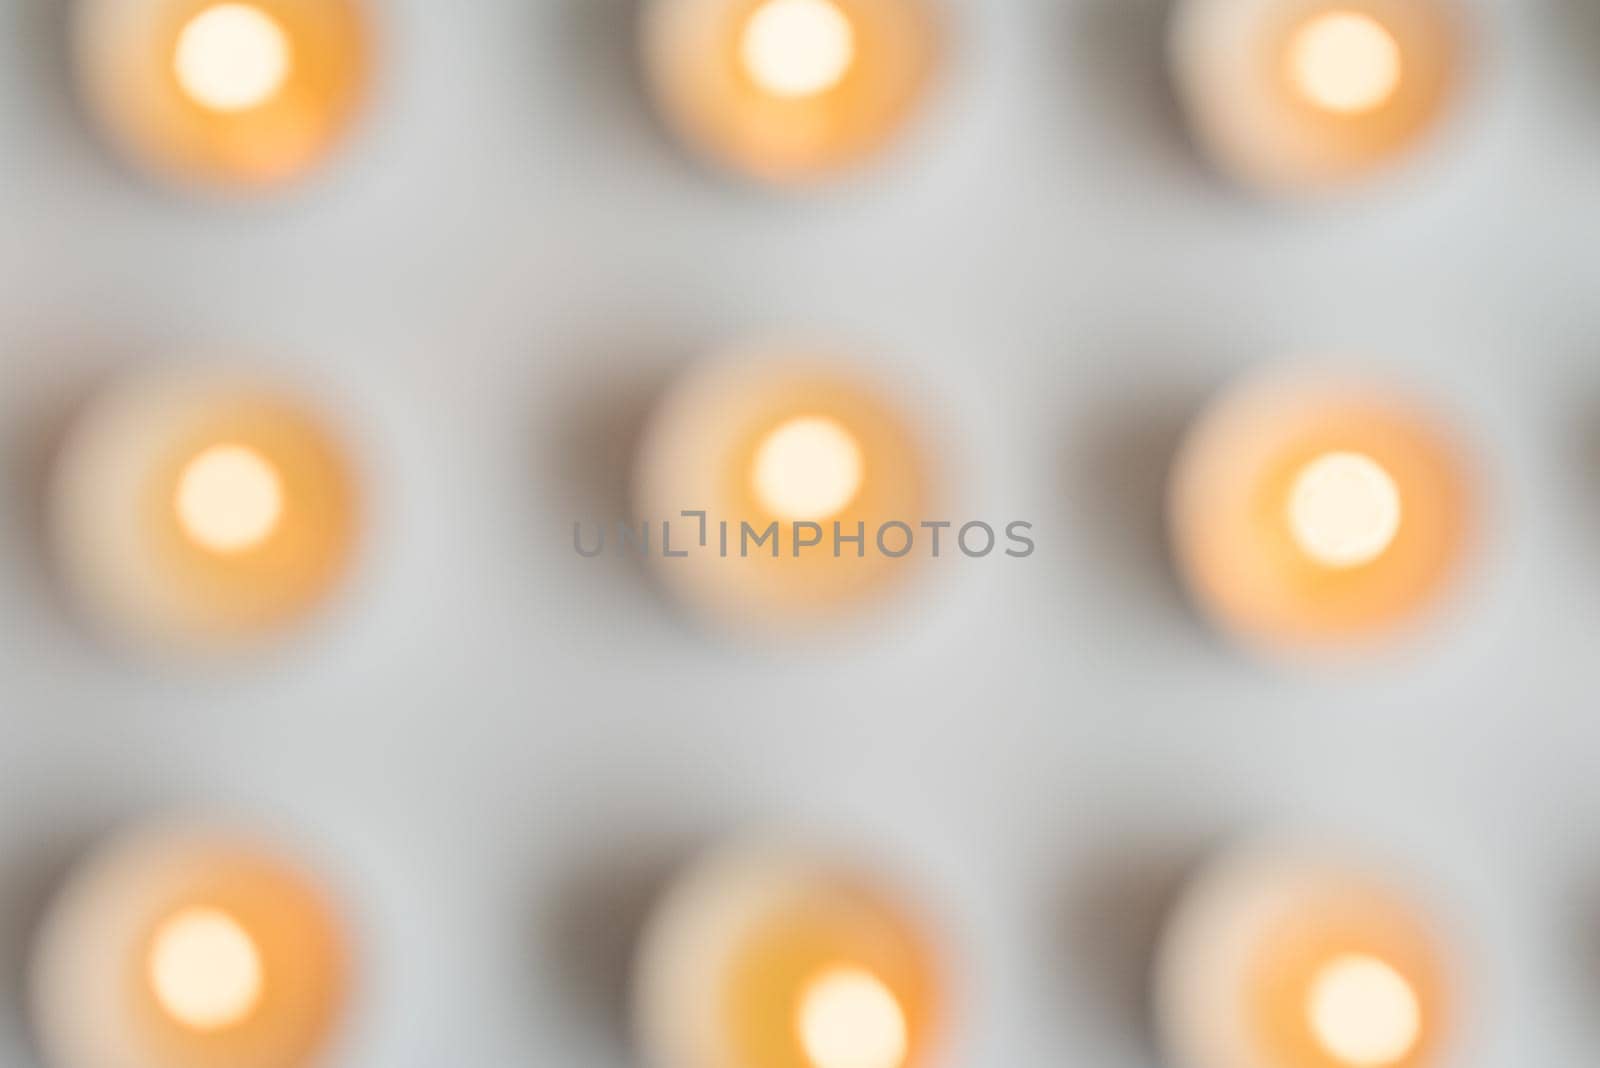 Blurry, abstract, high angle view of tealights on table